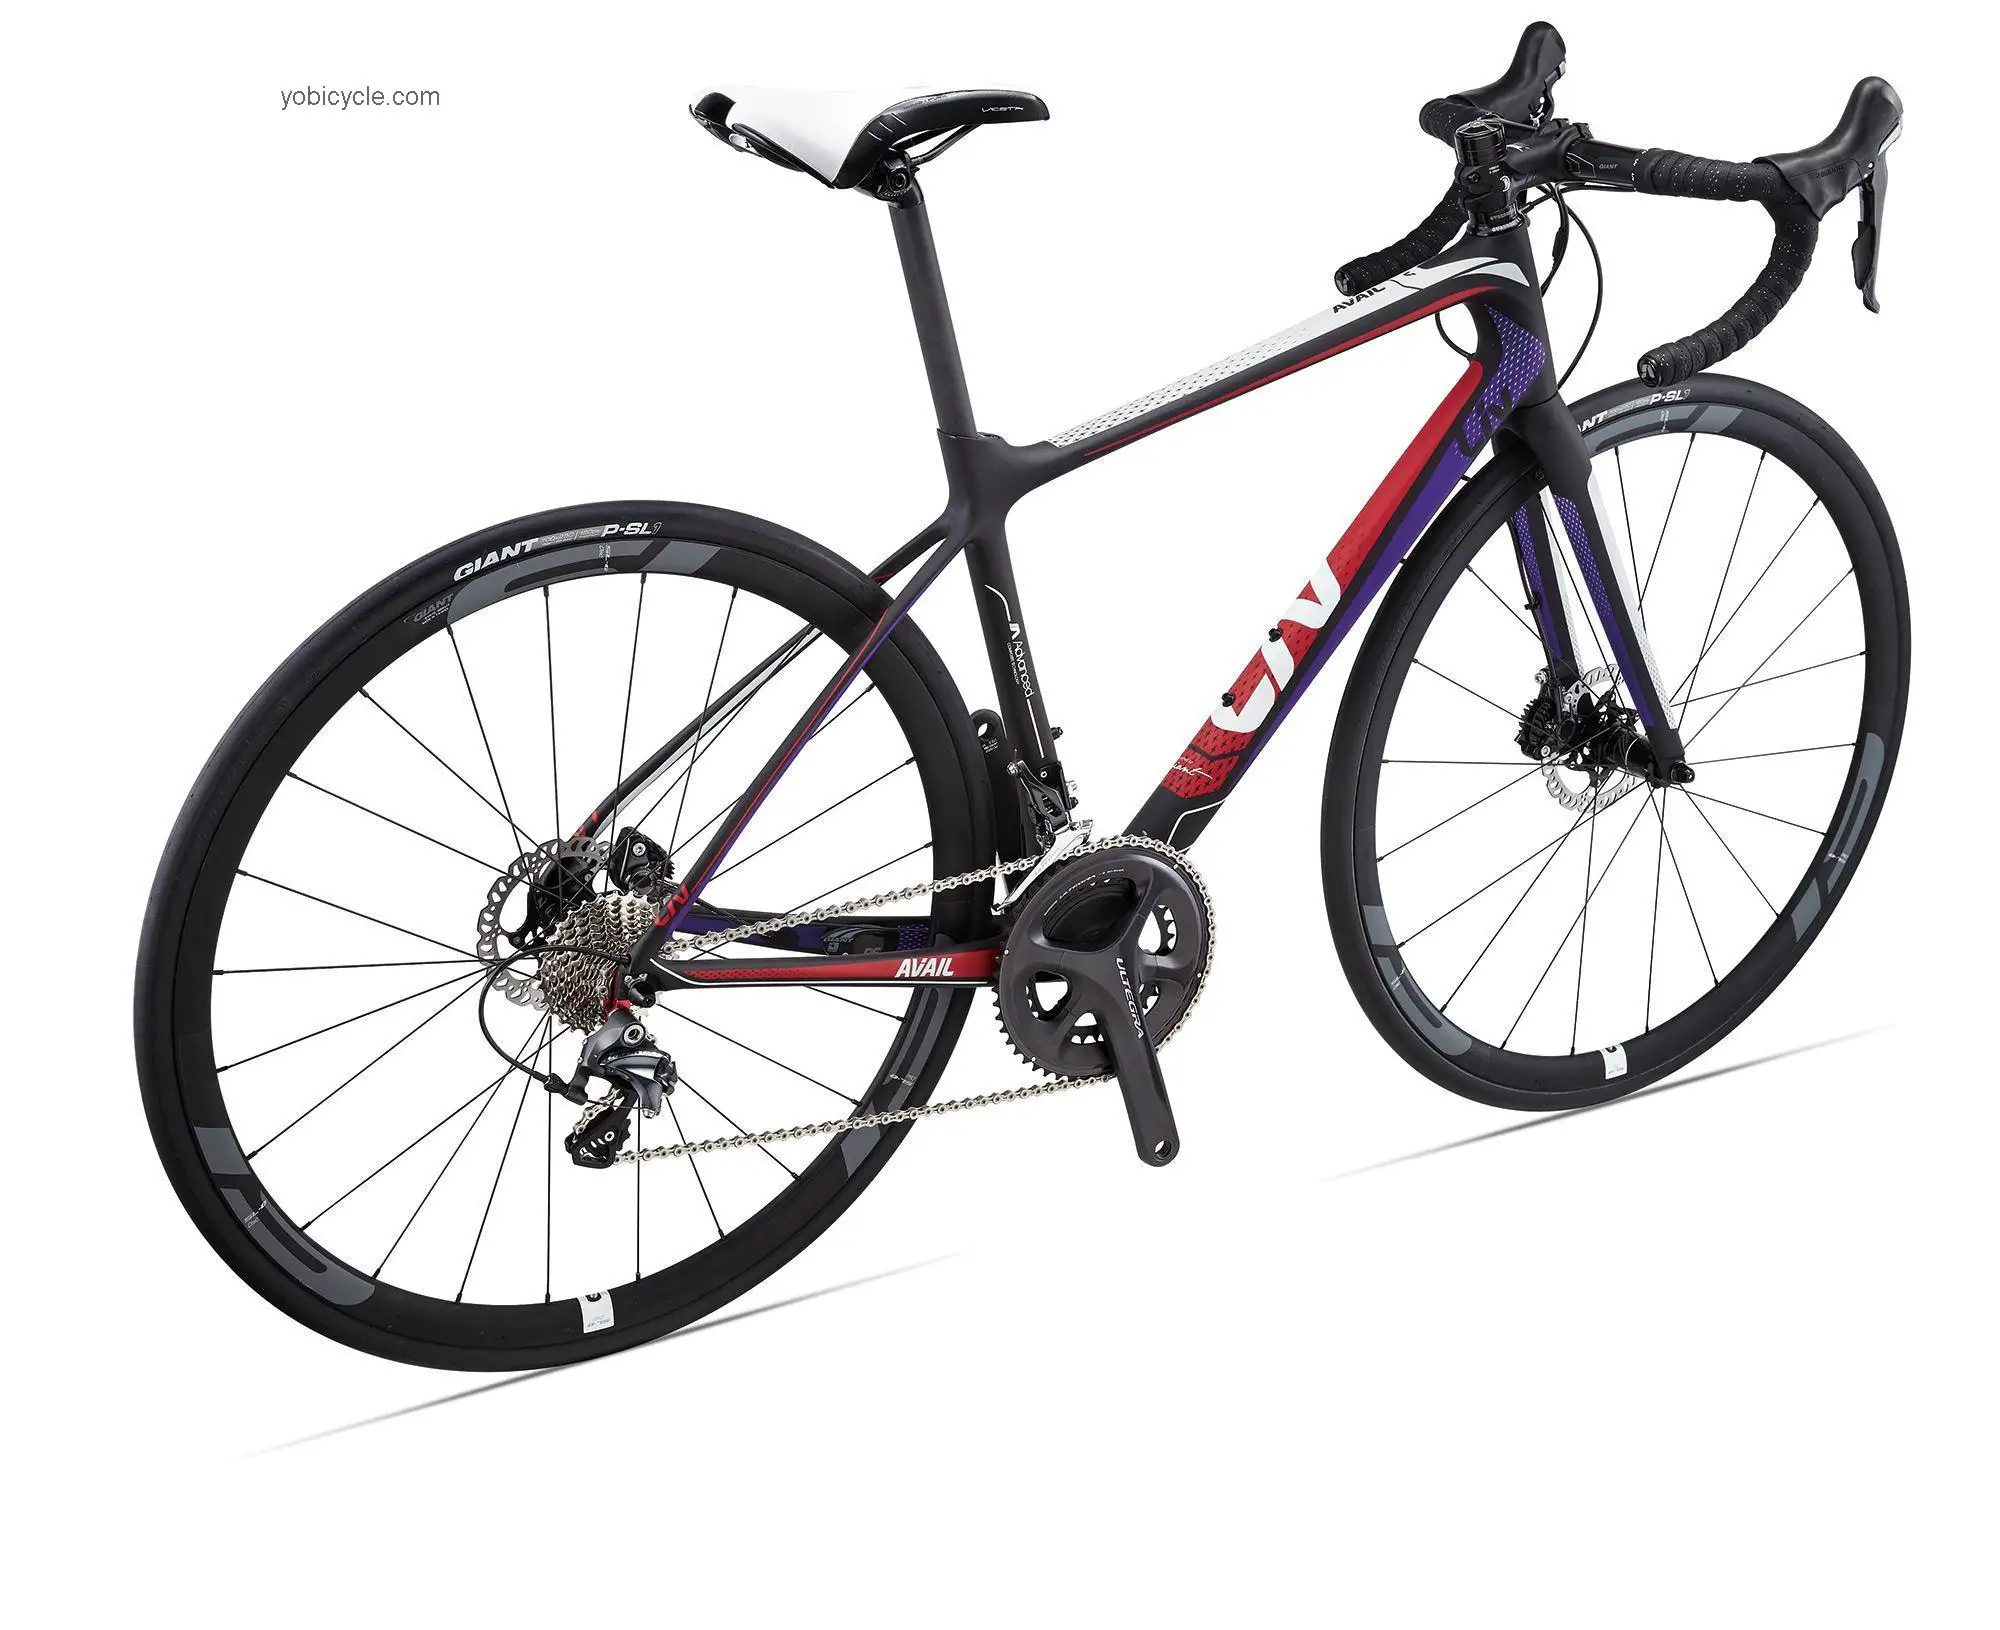 Giant Avail Advanced Pro 2015 comparison online with competitors